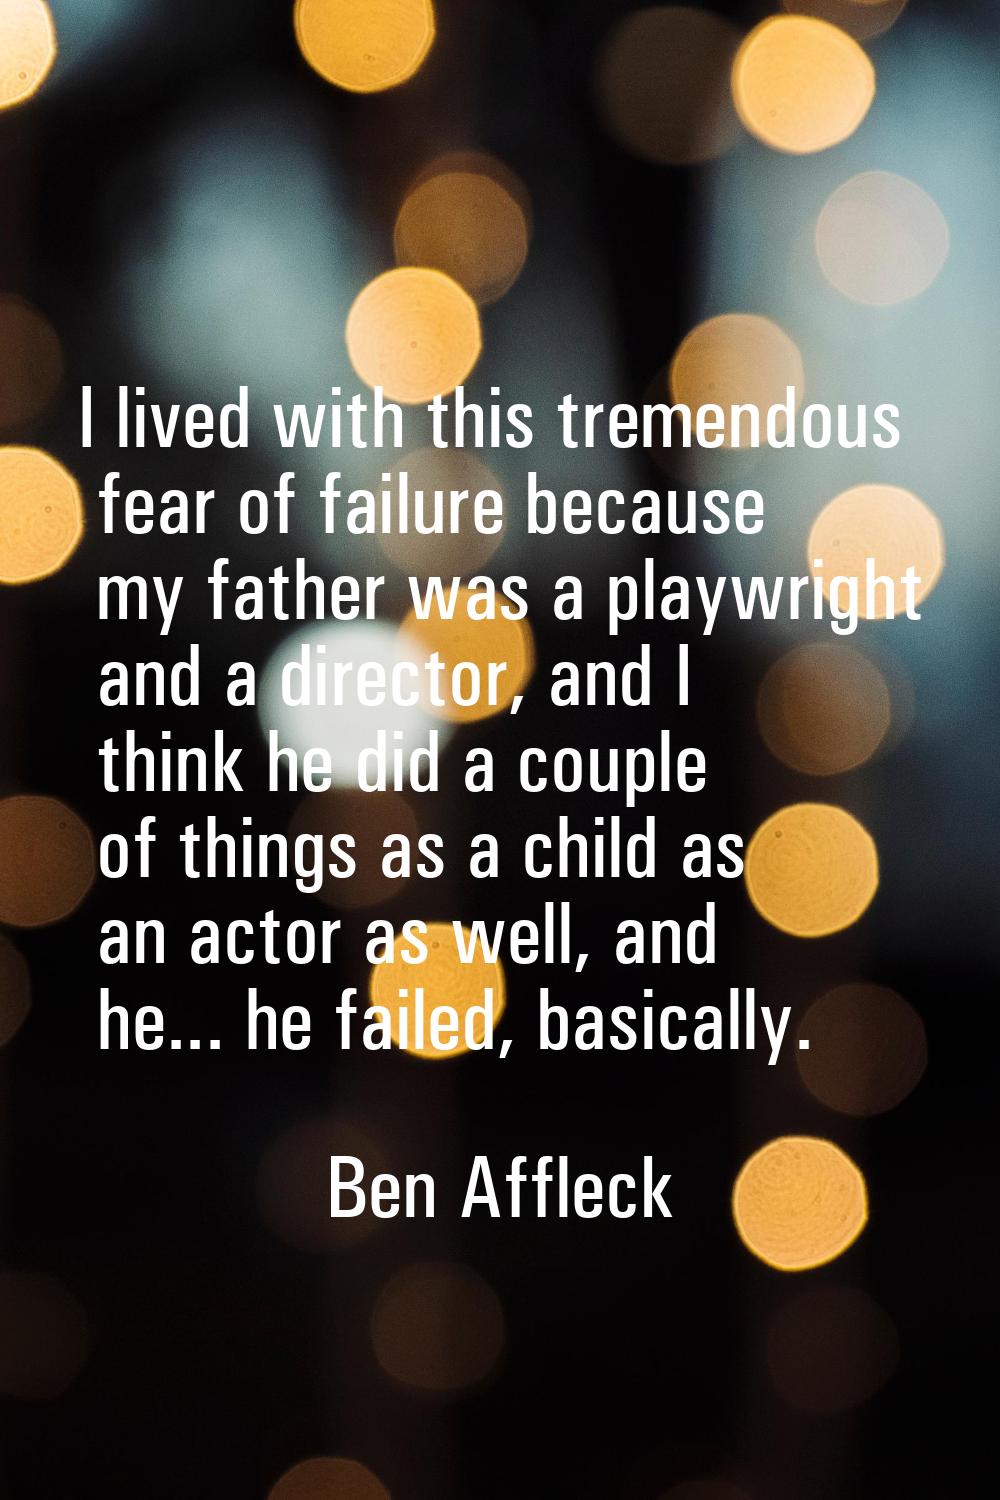 I lived with this tremendous fear of failure because my father was a playwright and a director, and